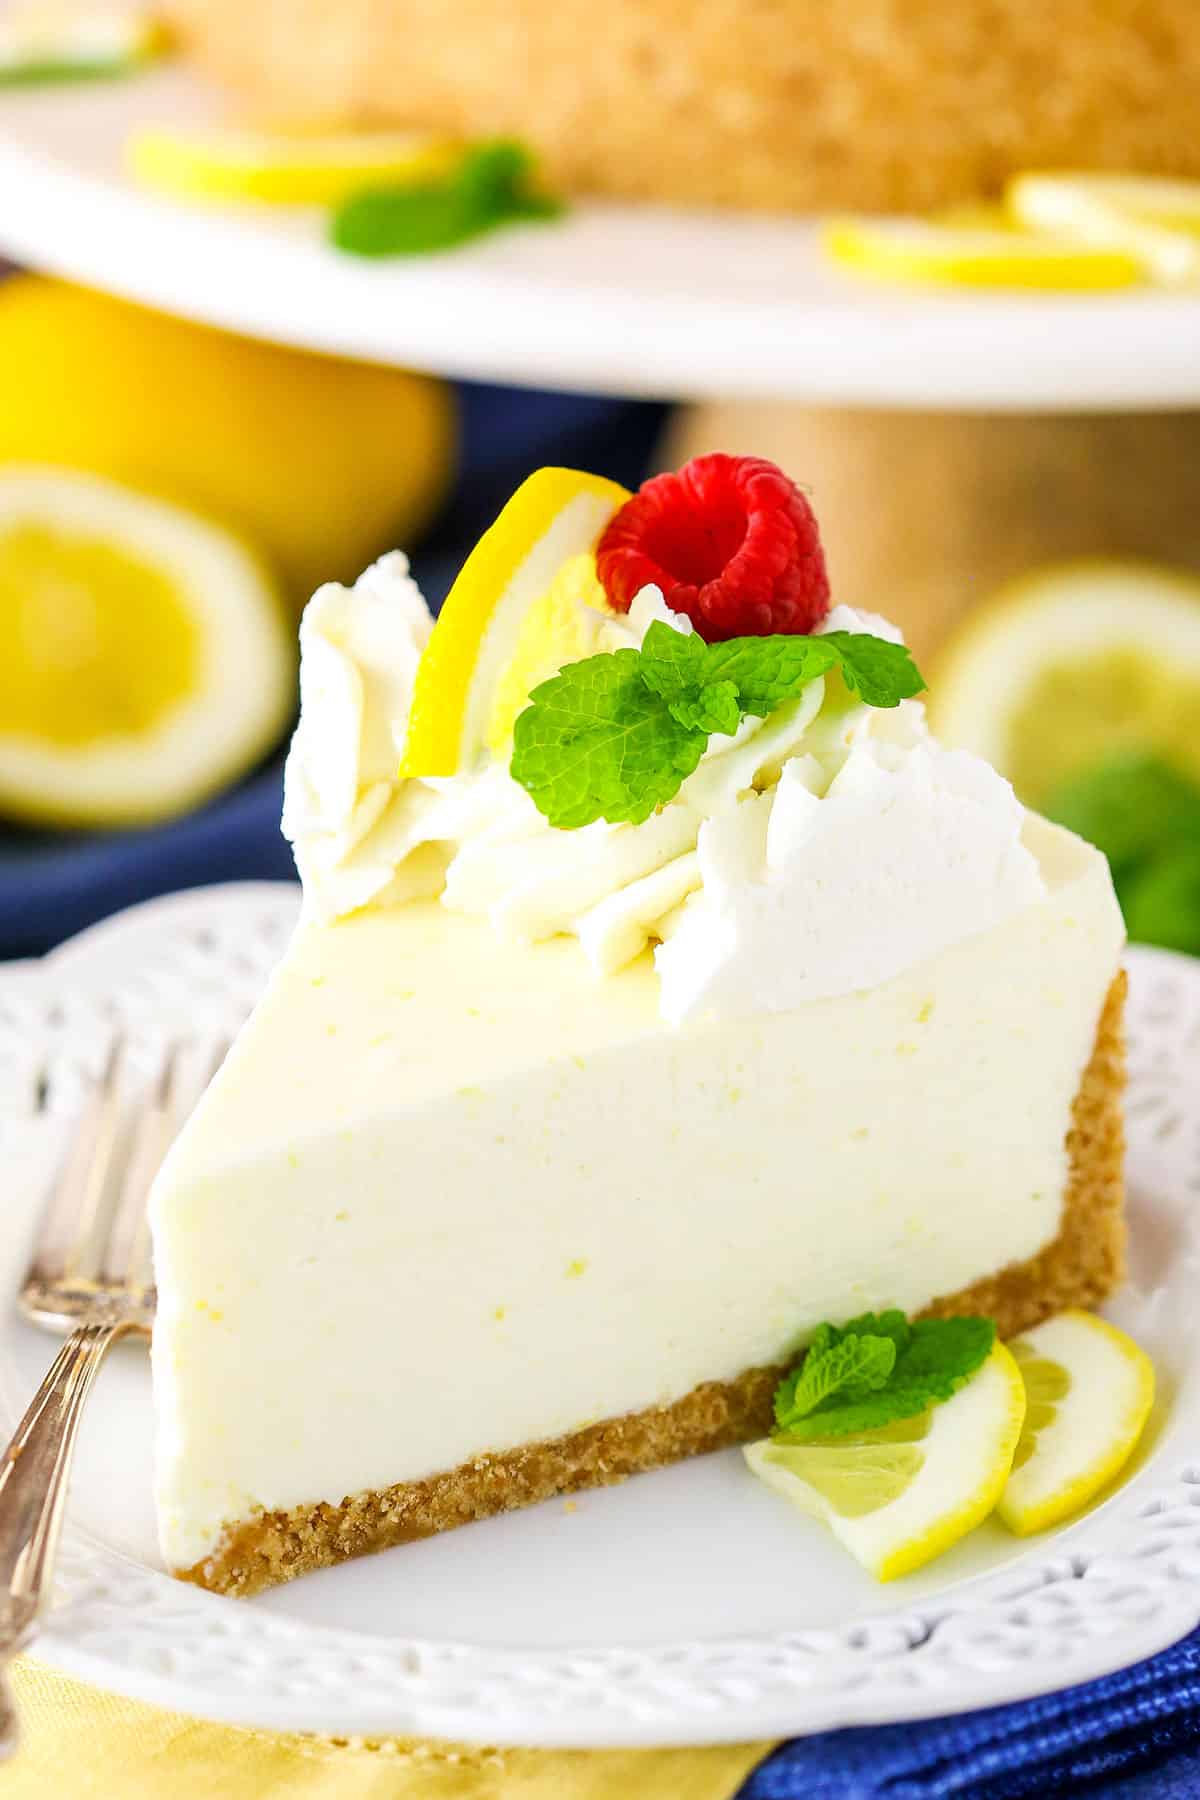 A slice of No Bake Lemon Cheesecake next to a silver fork on a white plate